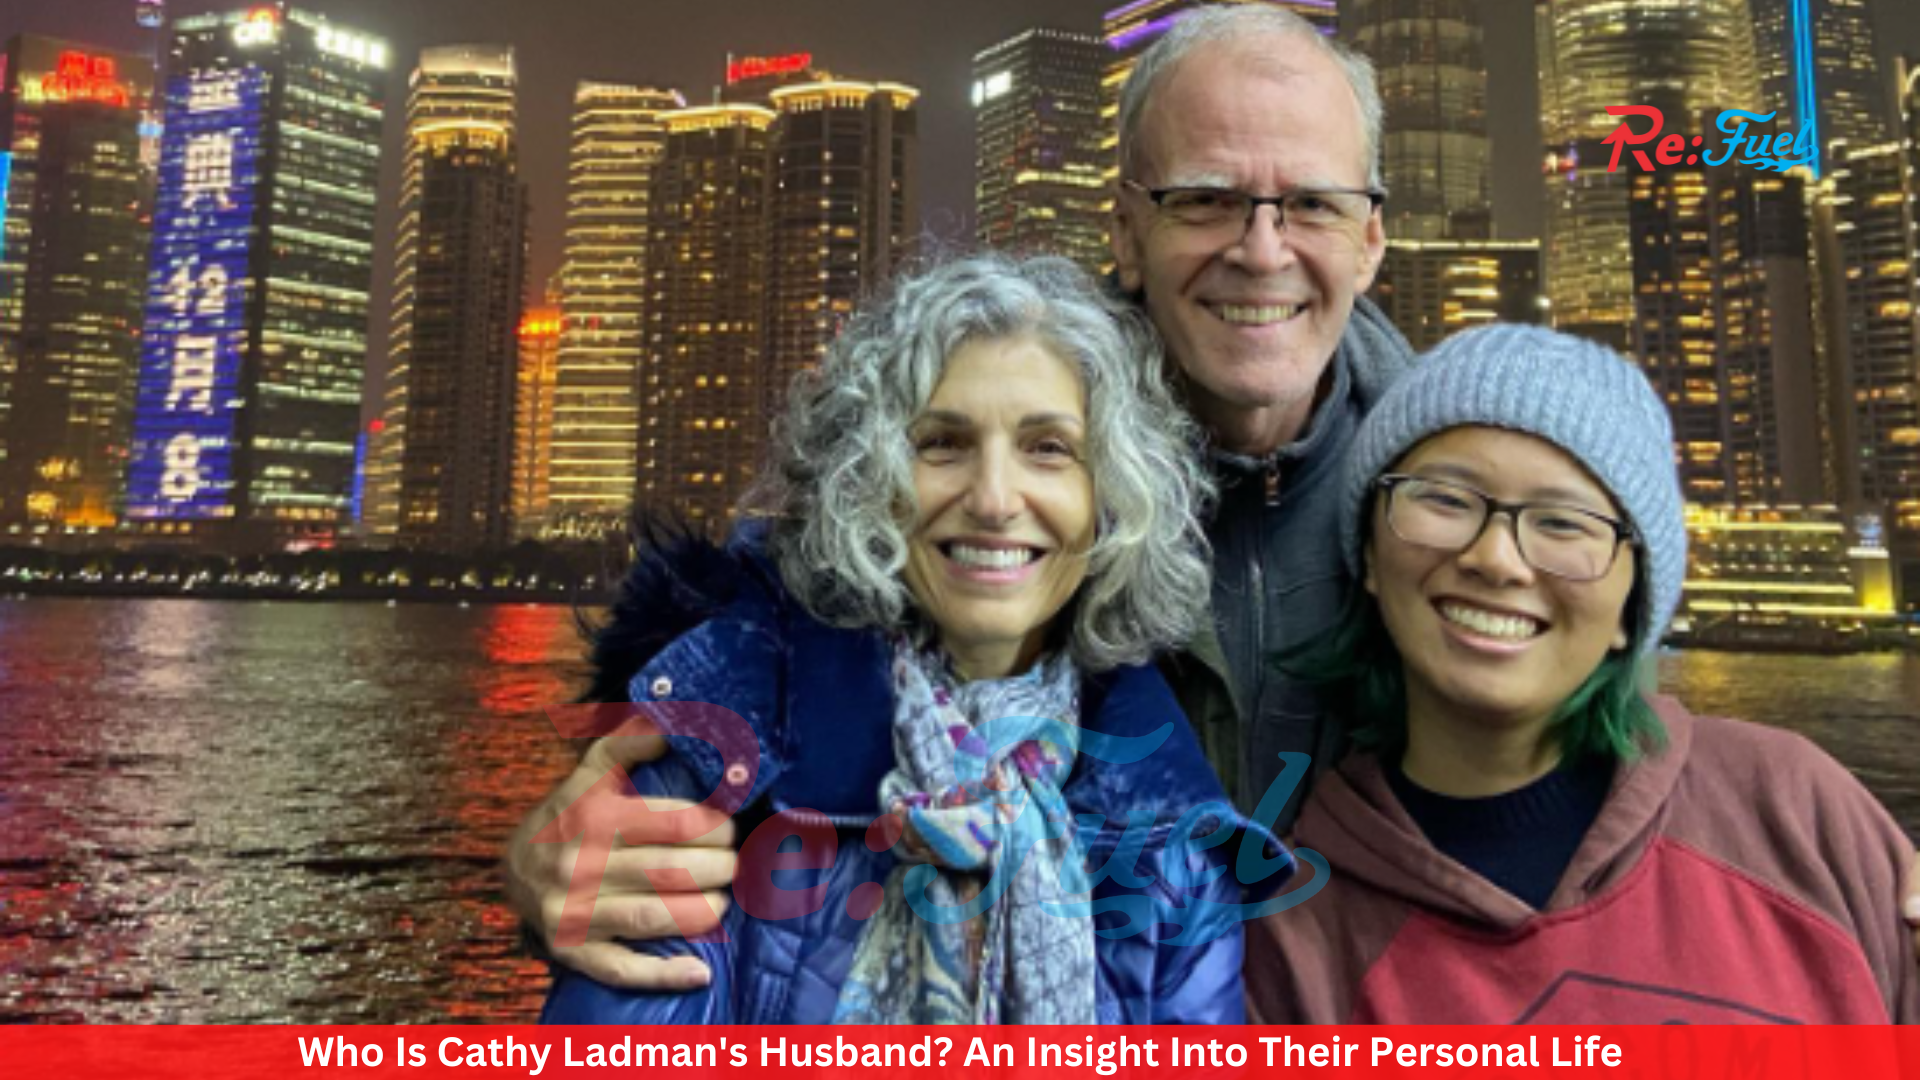 Who Is Cathy Ladman's Husband? An Insight Into Their Personal Life